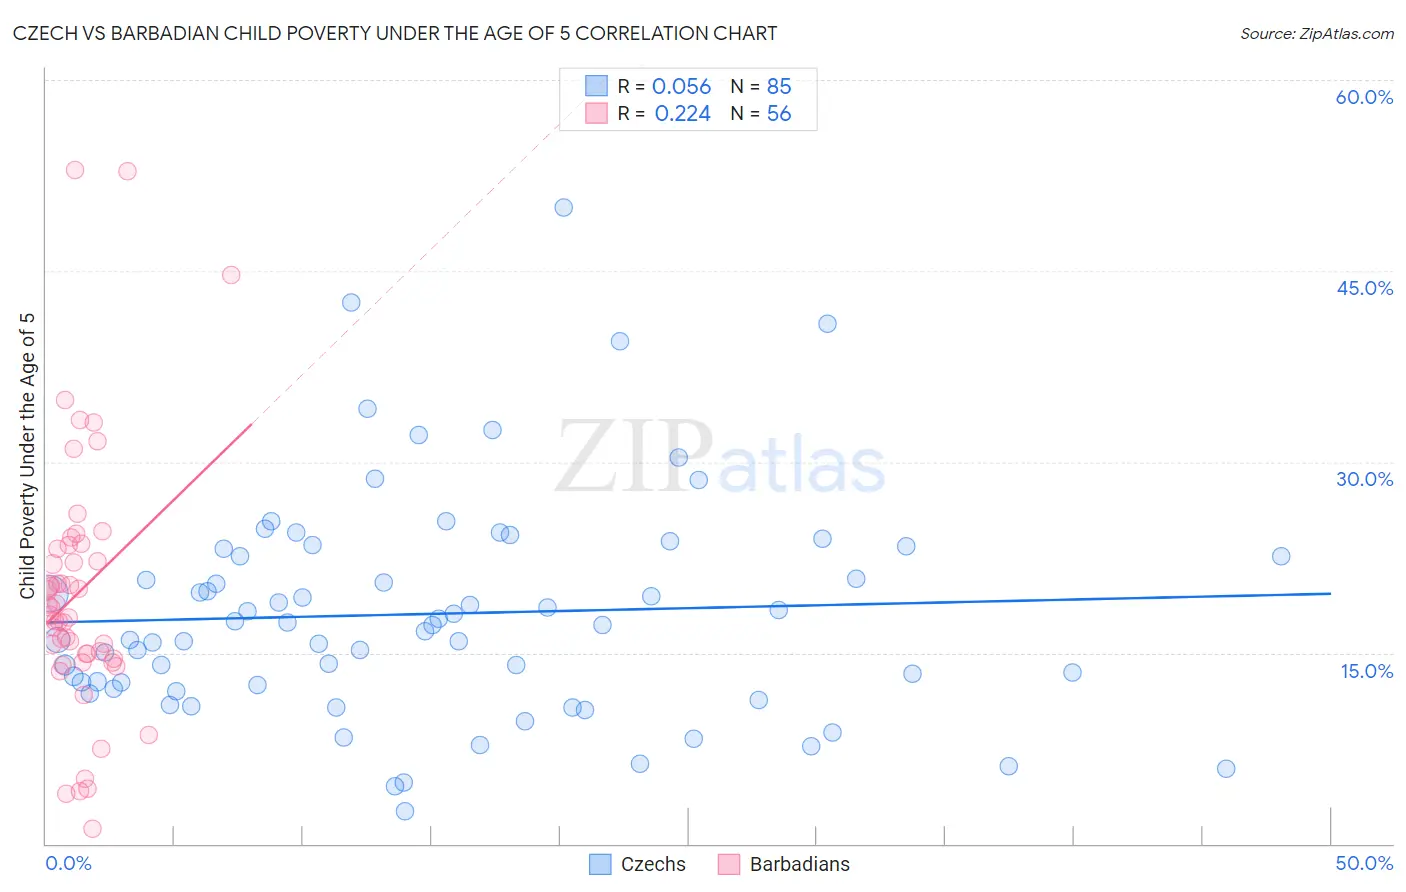 Czech vs Barbadian Child Poverty Under the Age of 5